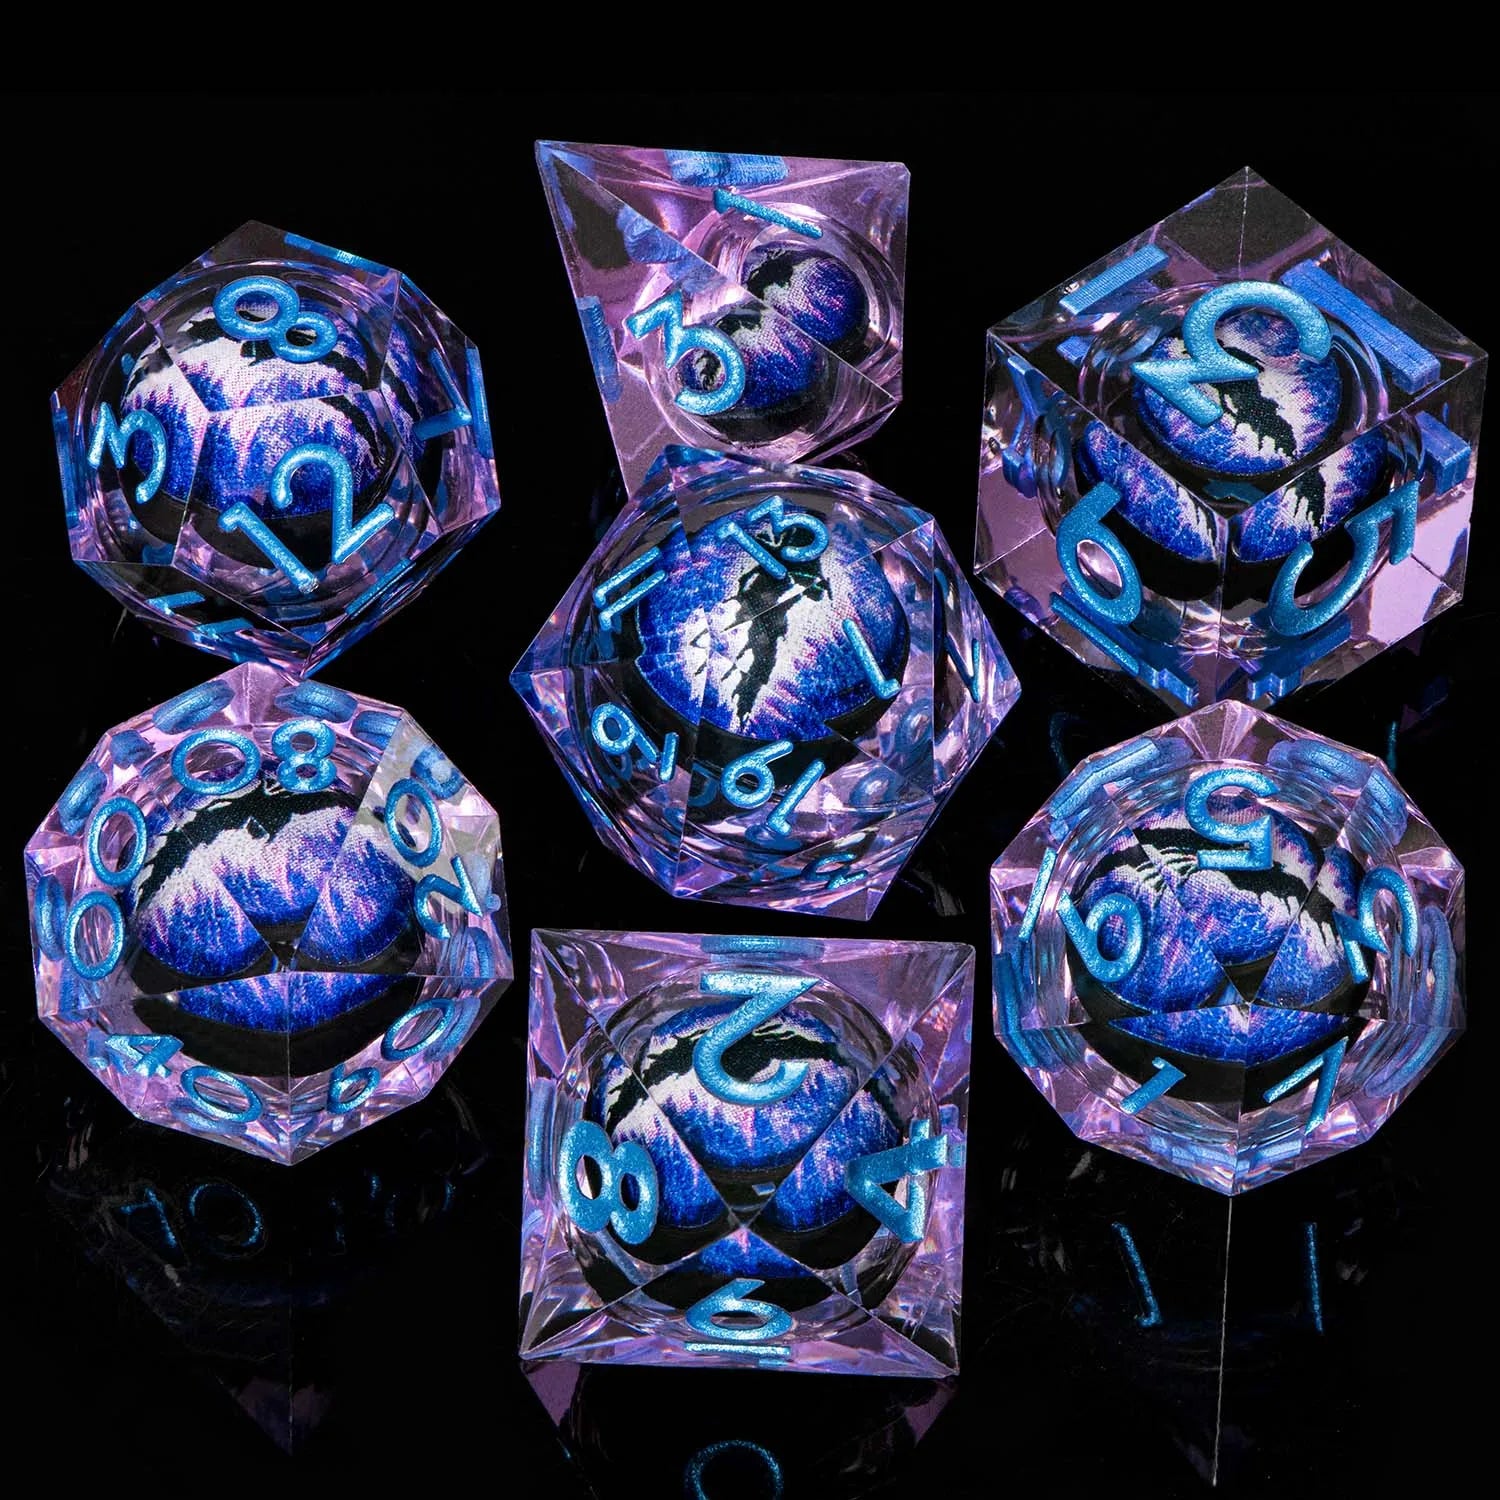 D and D Beholder's Liquid Flow Core Eye Resin Dice Set | Dnd Dungeon and Dragon Pathfinder Role Playing Game Dice | D20 D&D Dice YY-06